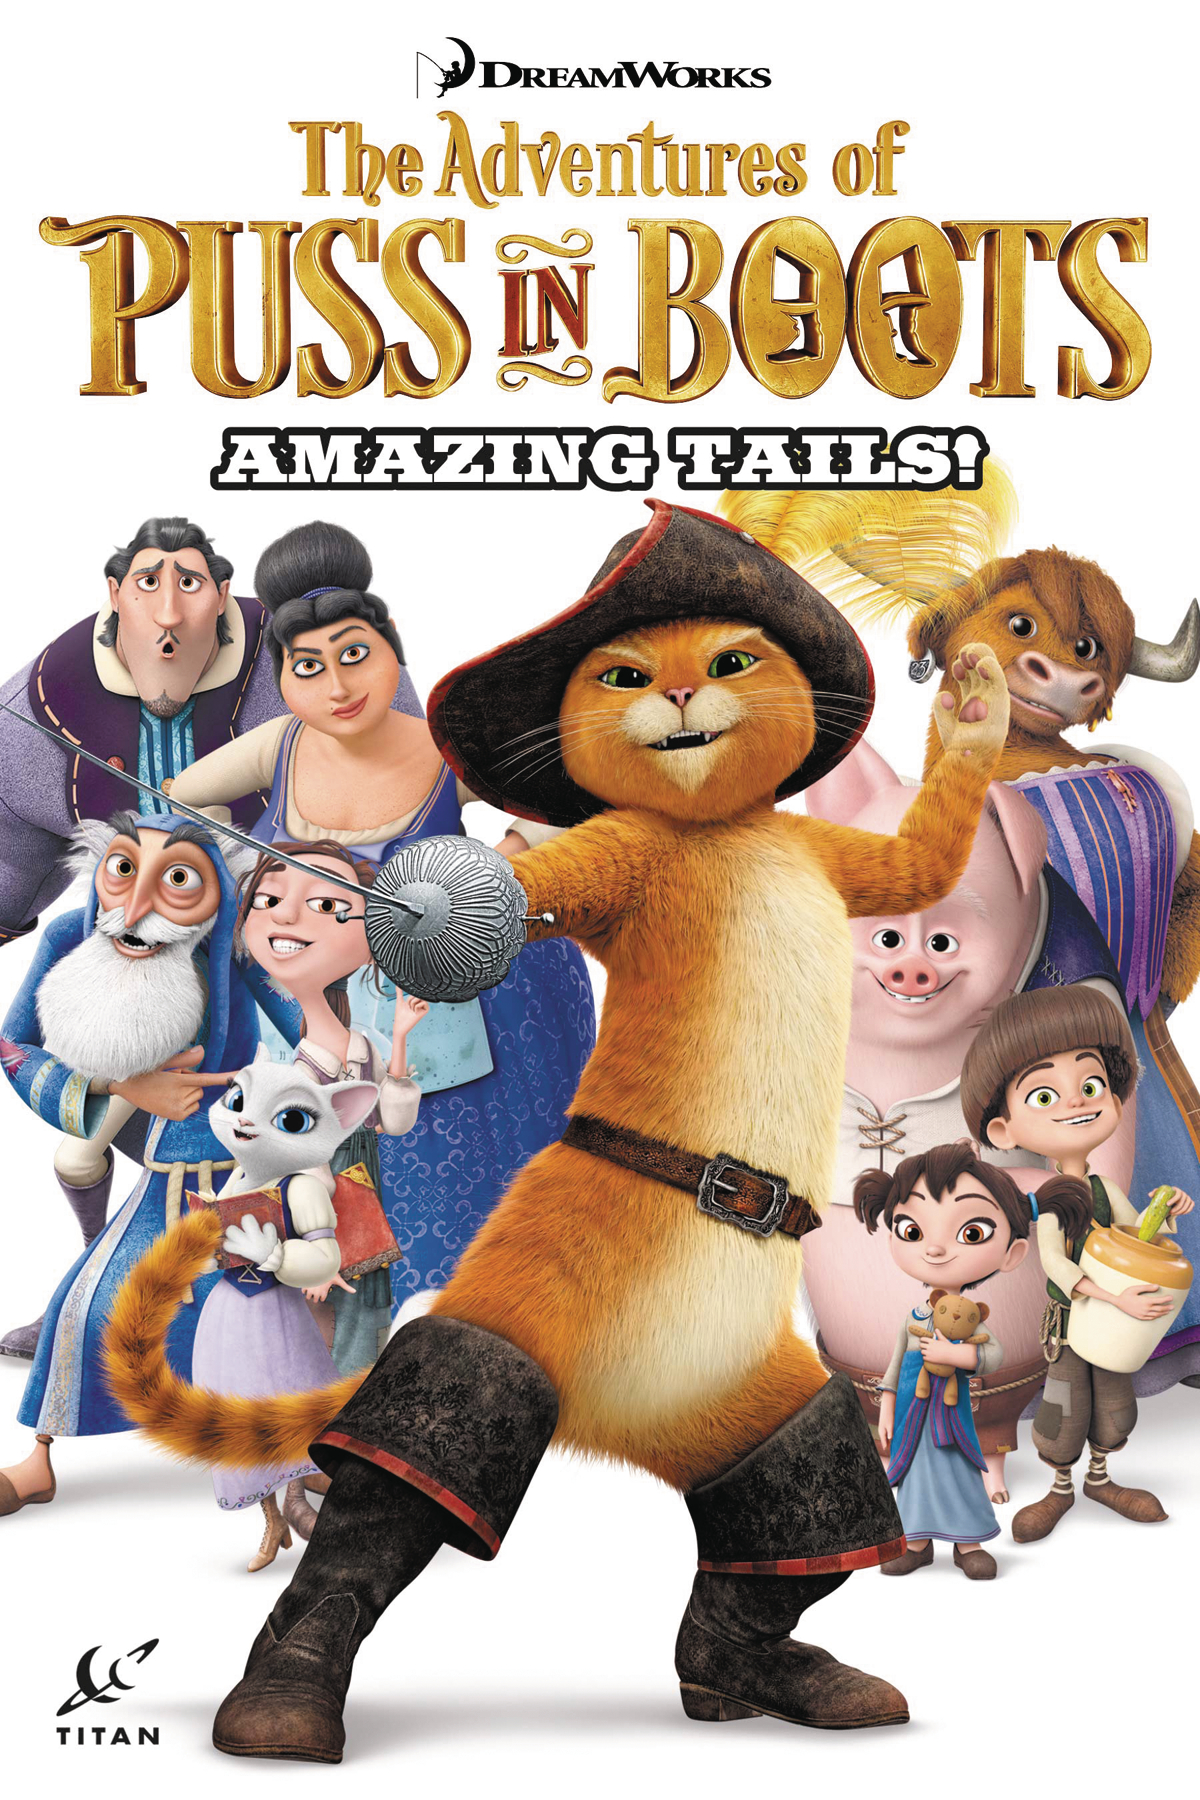 PUSS IN BOOTS TP AMAZING TAILS